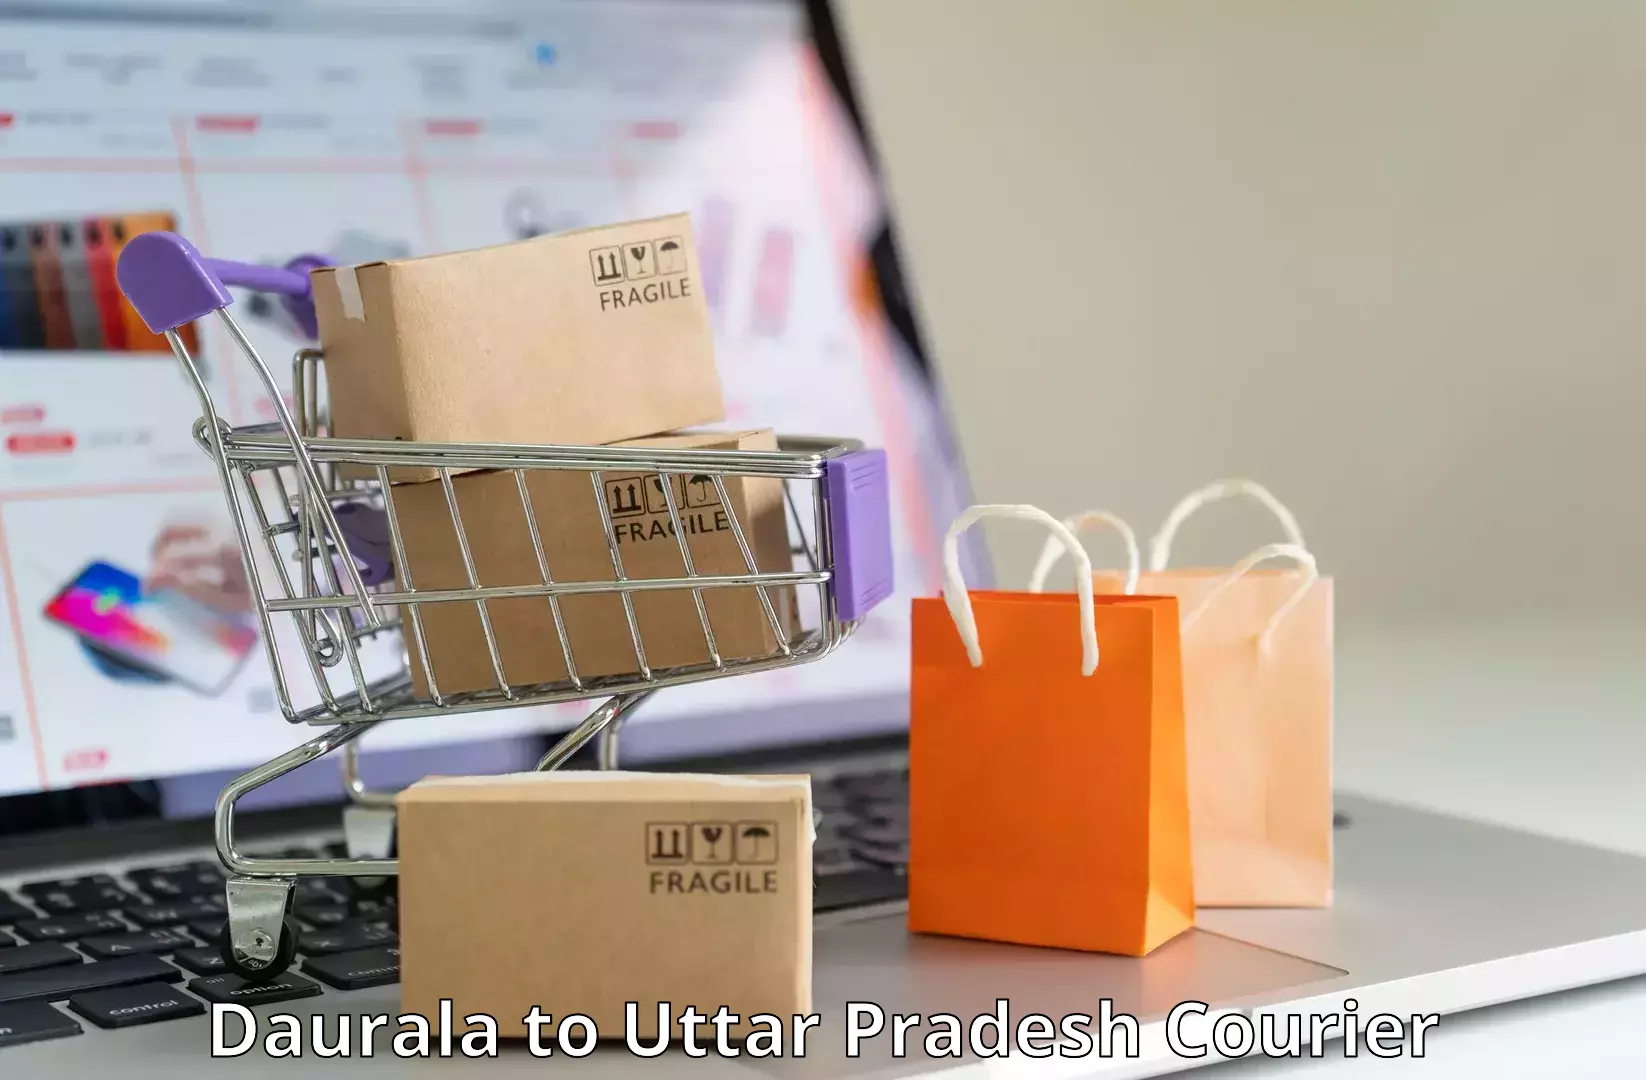 Full-service courier options Daurala to Sidhauli